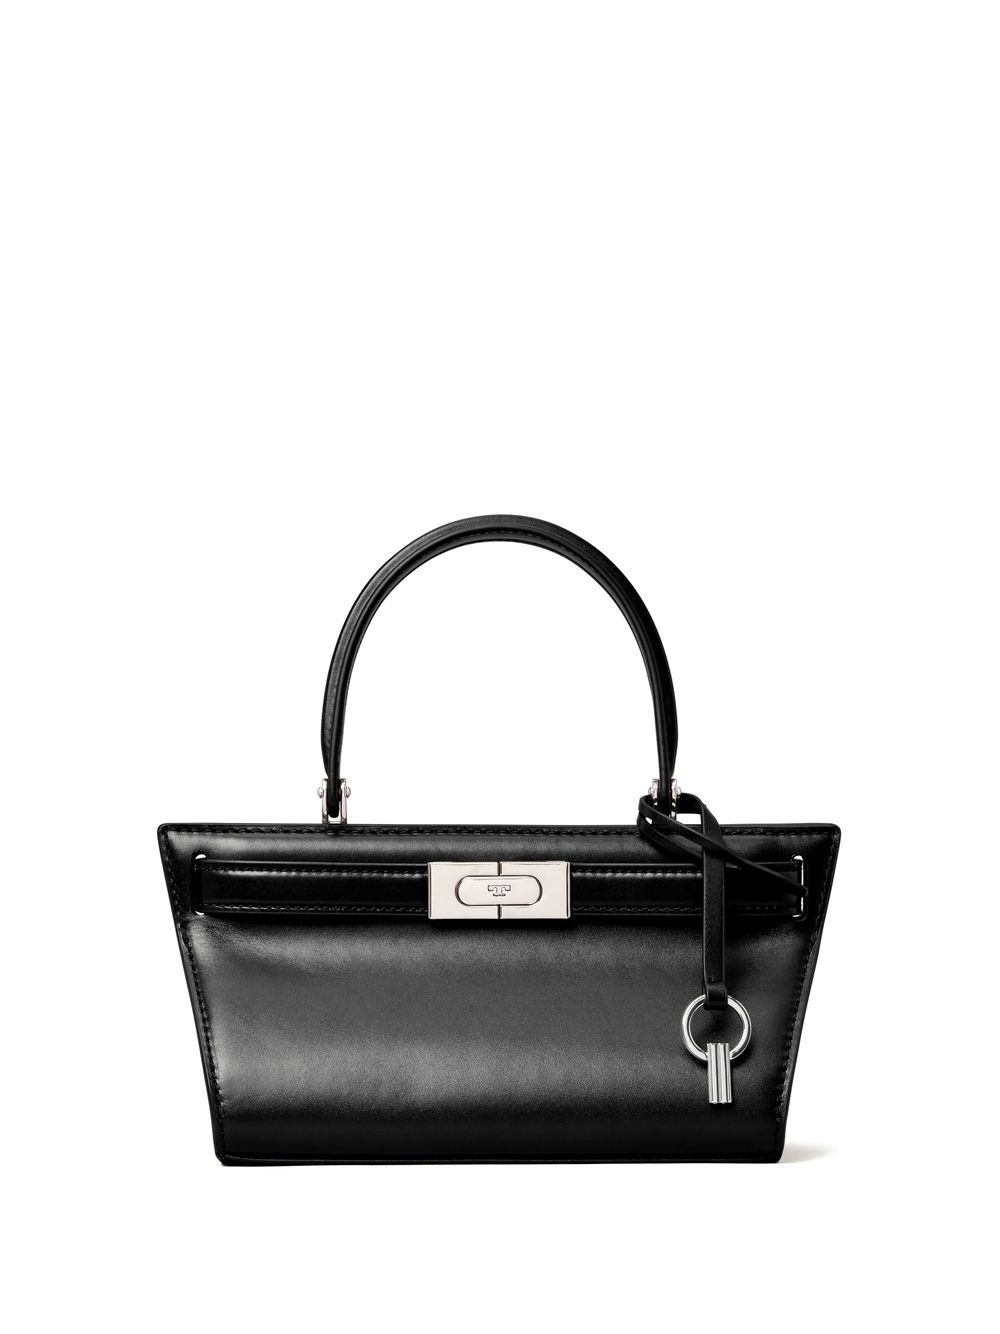 Image 1 of Tory Burch Lee Radziwill leather tote